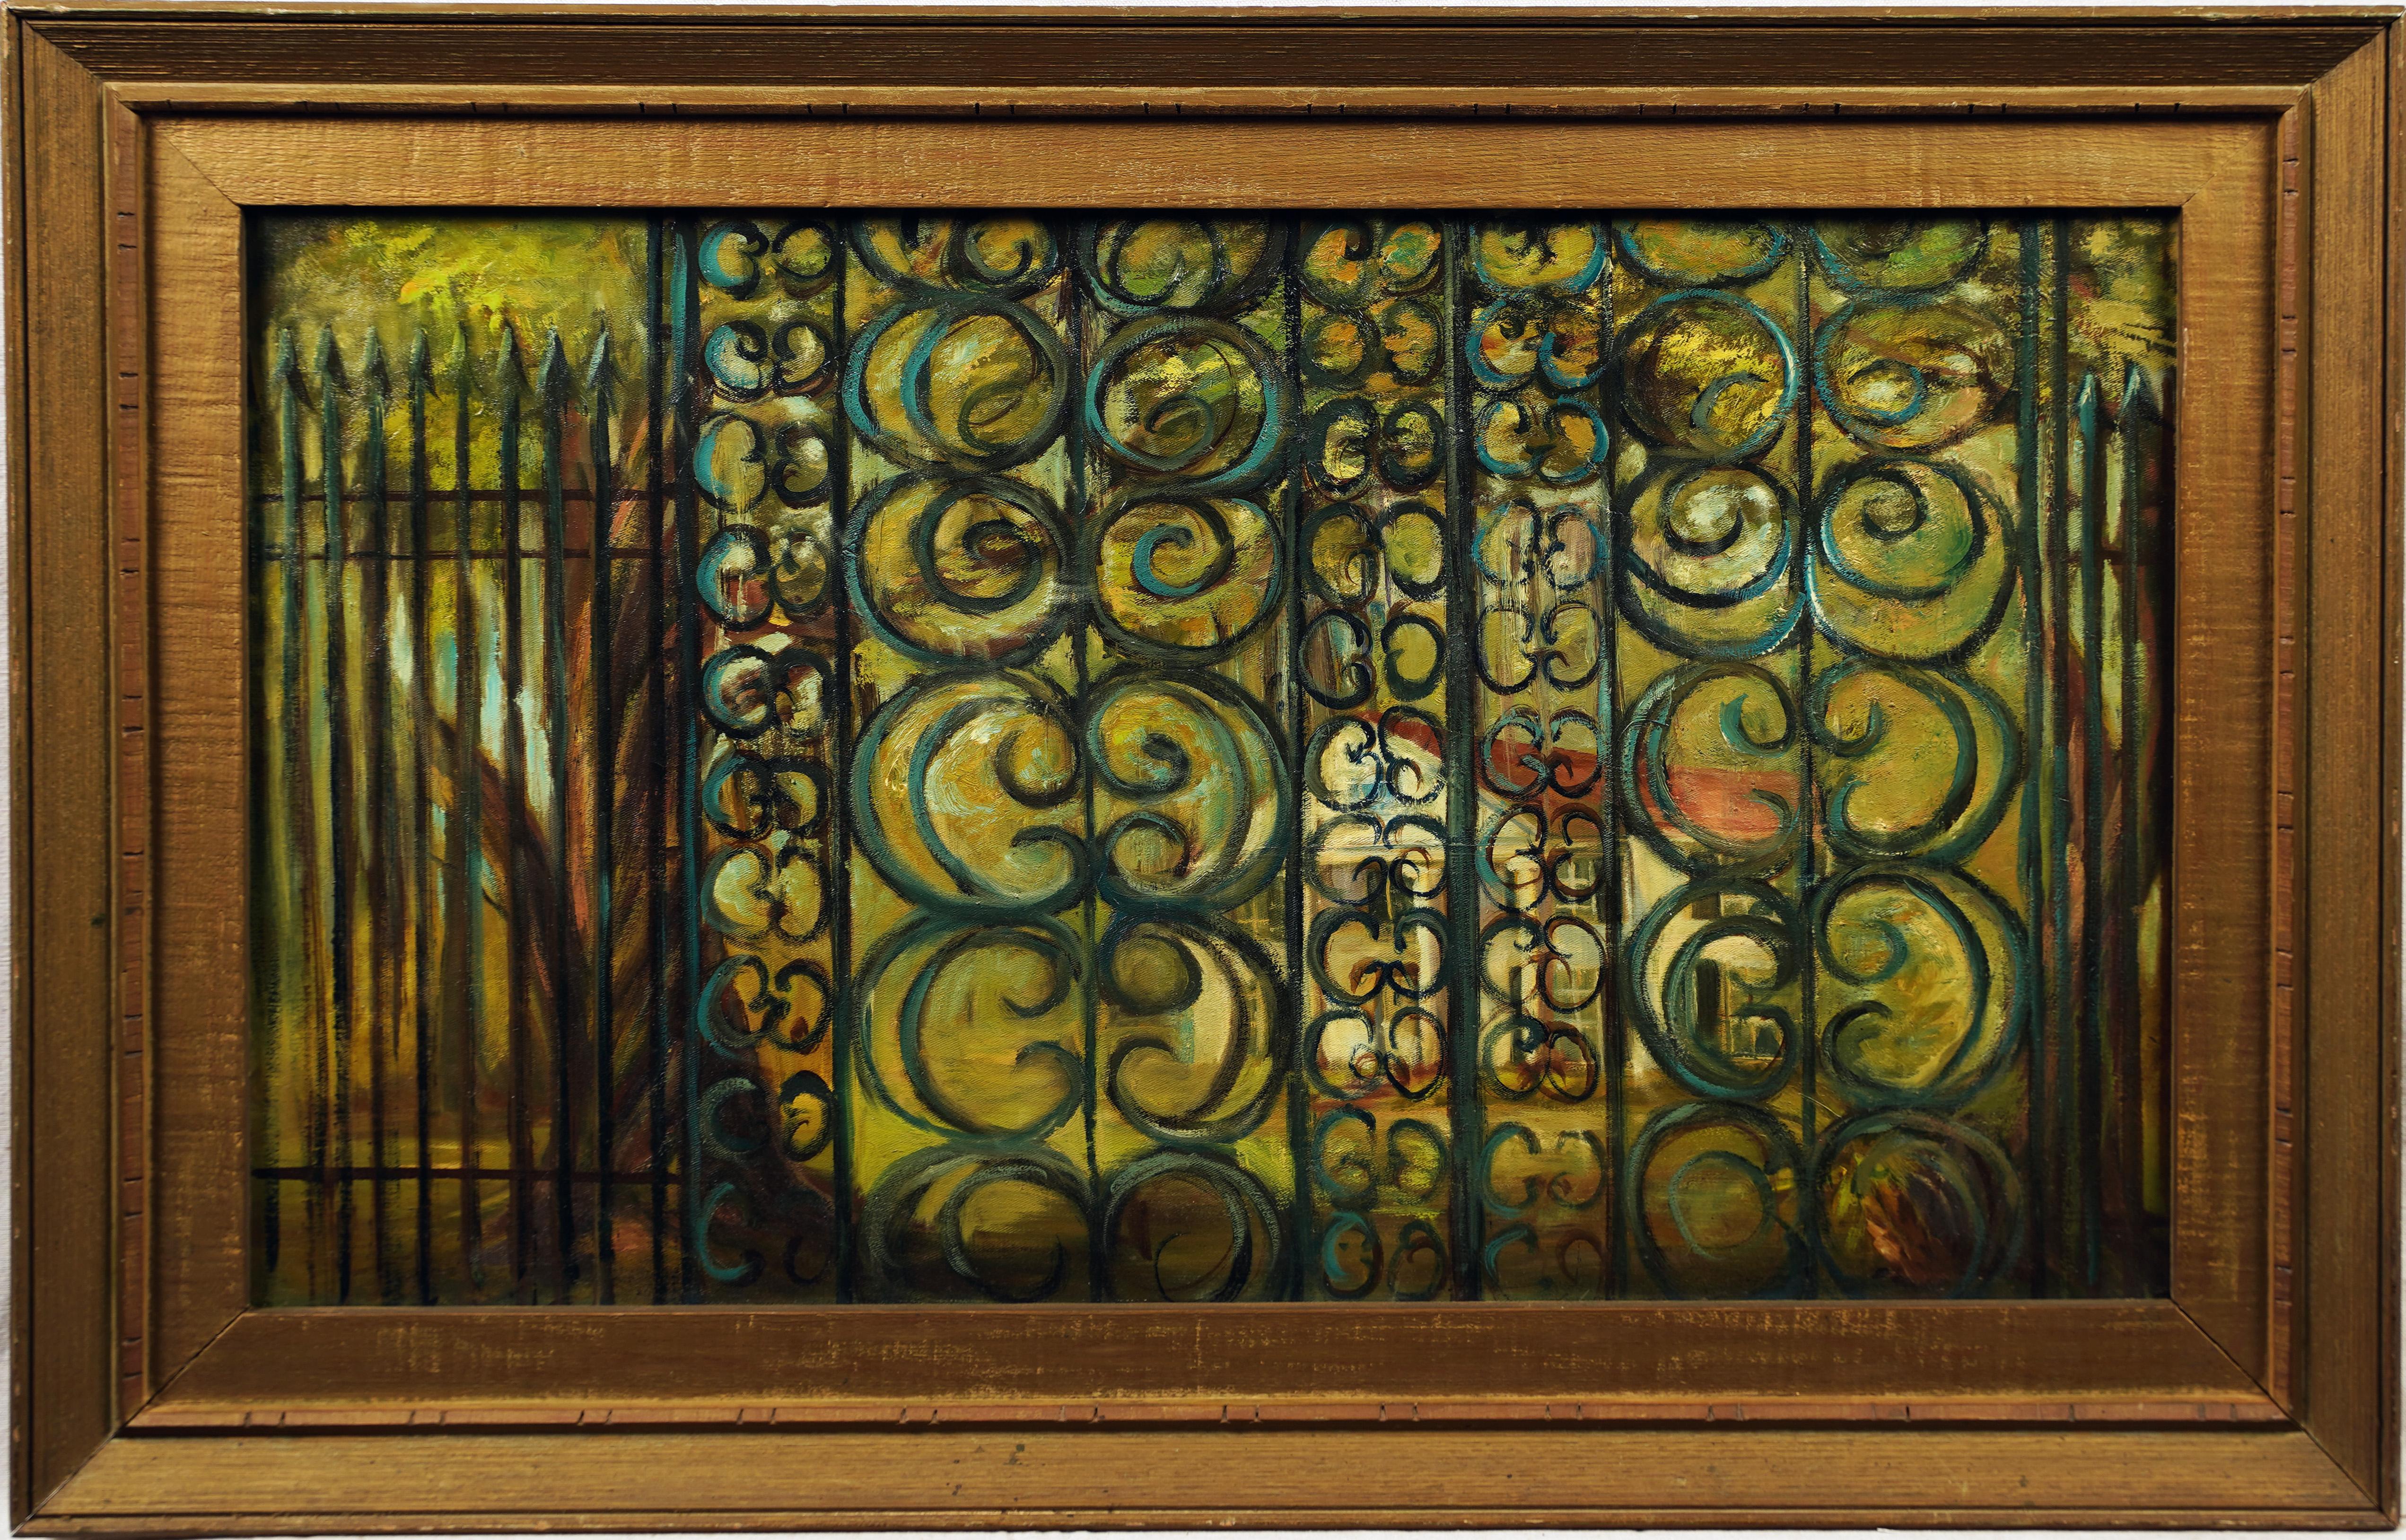 Antique American modernist architectural iron gate oil painting.  Oil on canvas.  Signed.  Framed. 